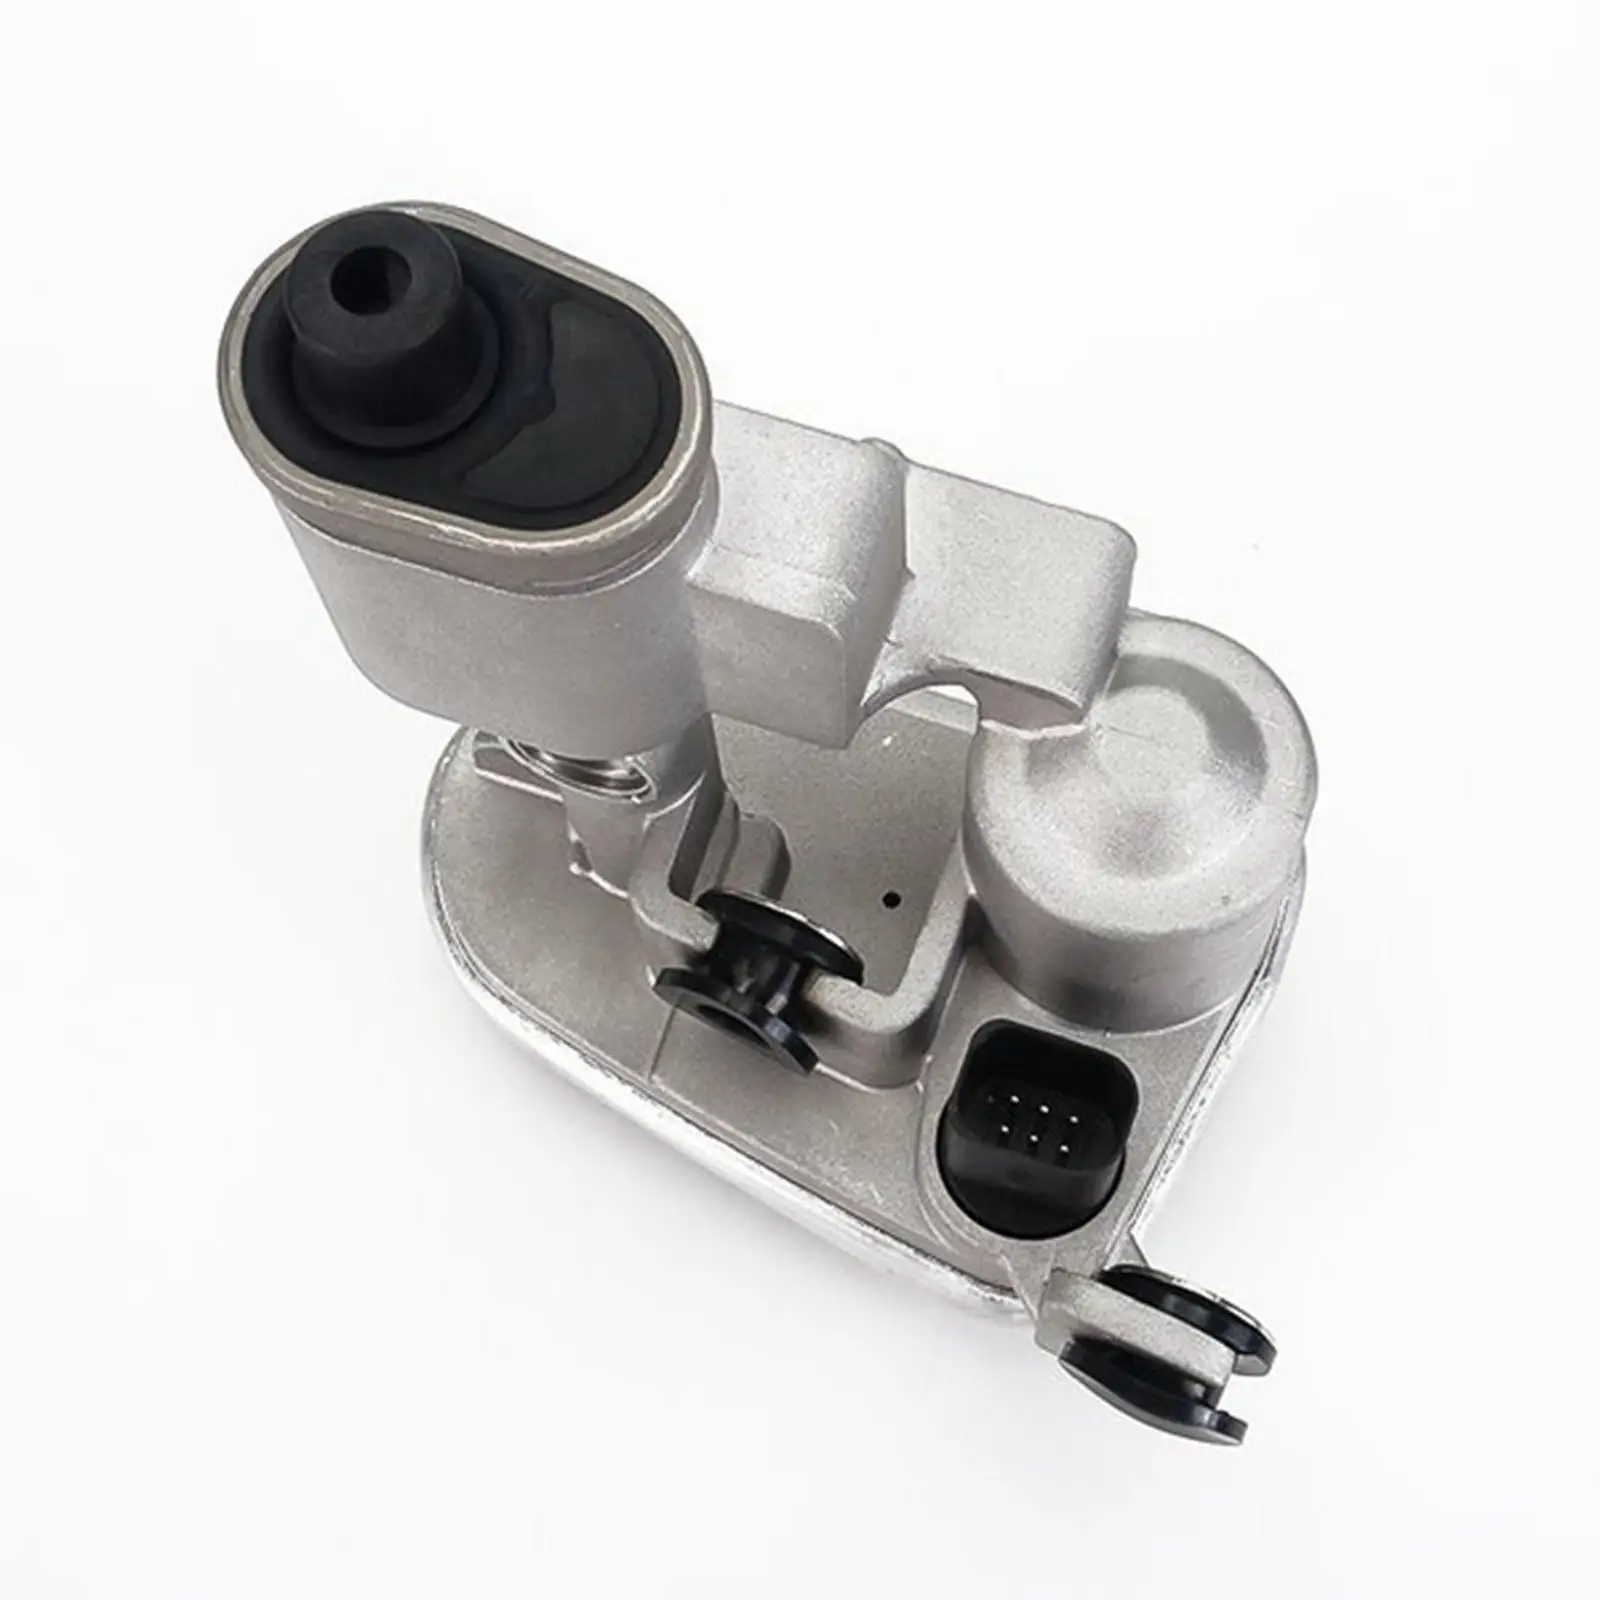 Auto Transmission Throttle Valve Actuator Throttle Control Lever for , 35,.9L 6.7L 6 Cyl Turbocharged Parts Replacement